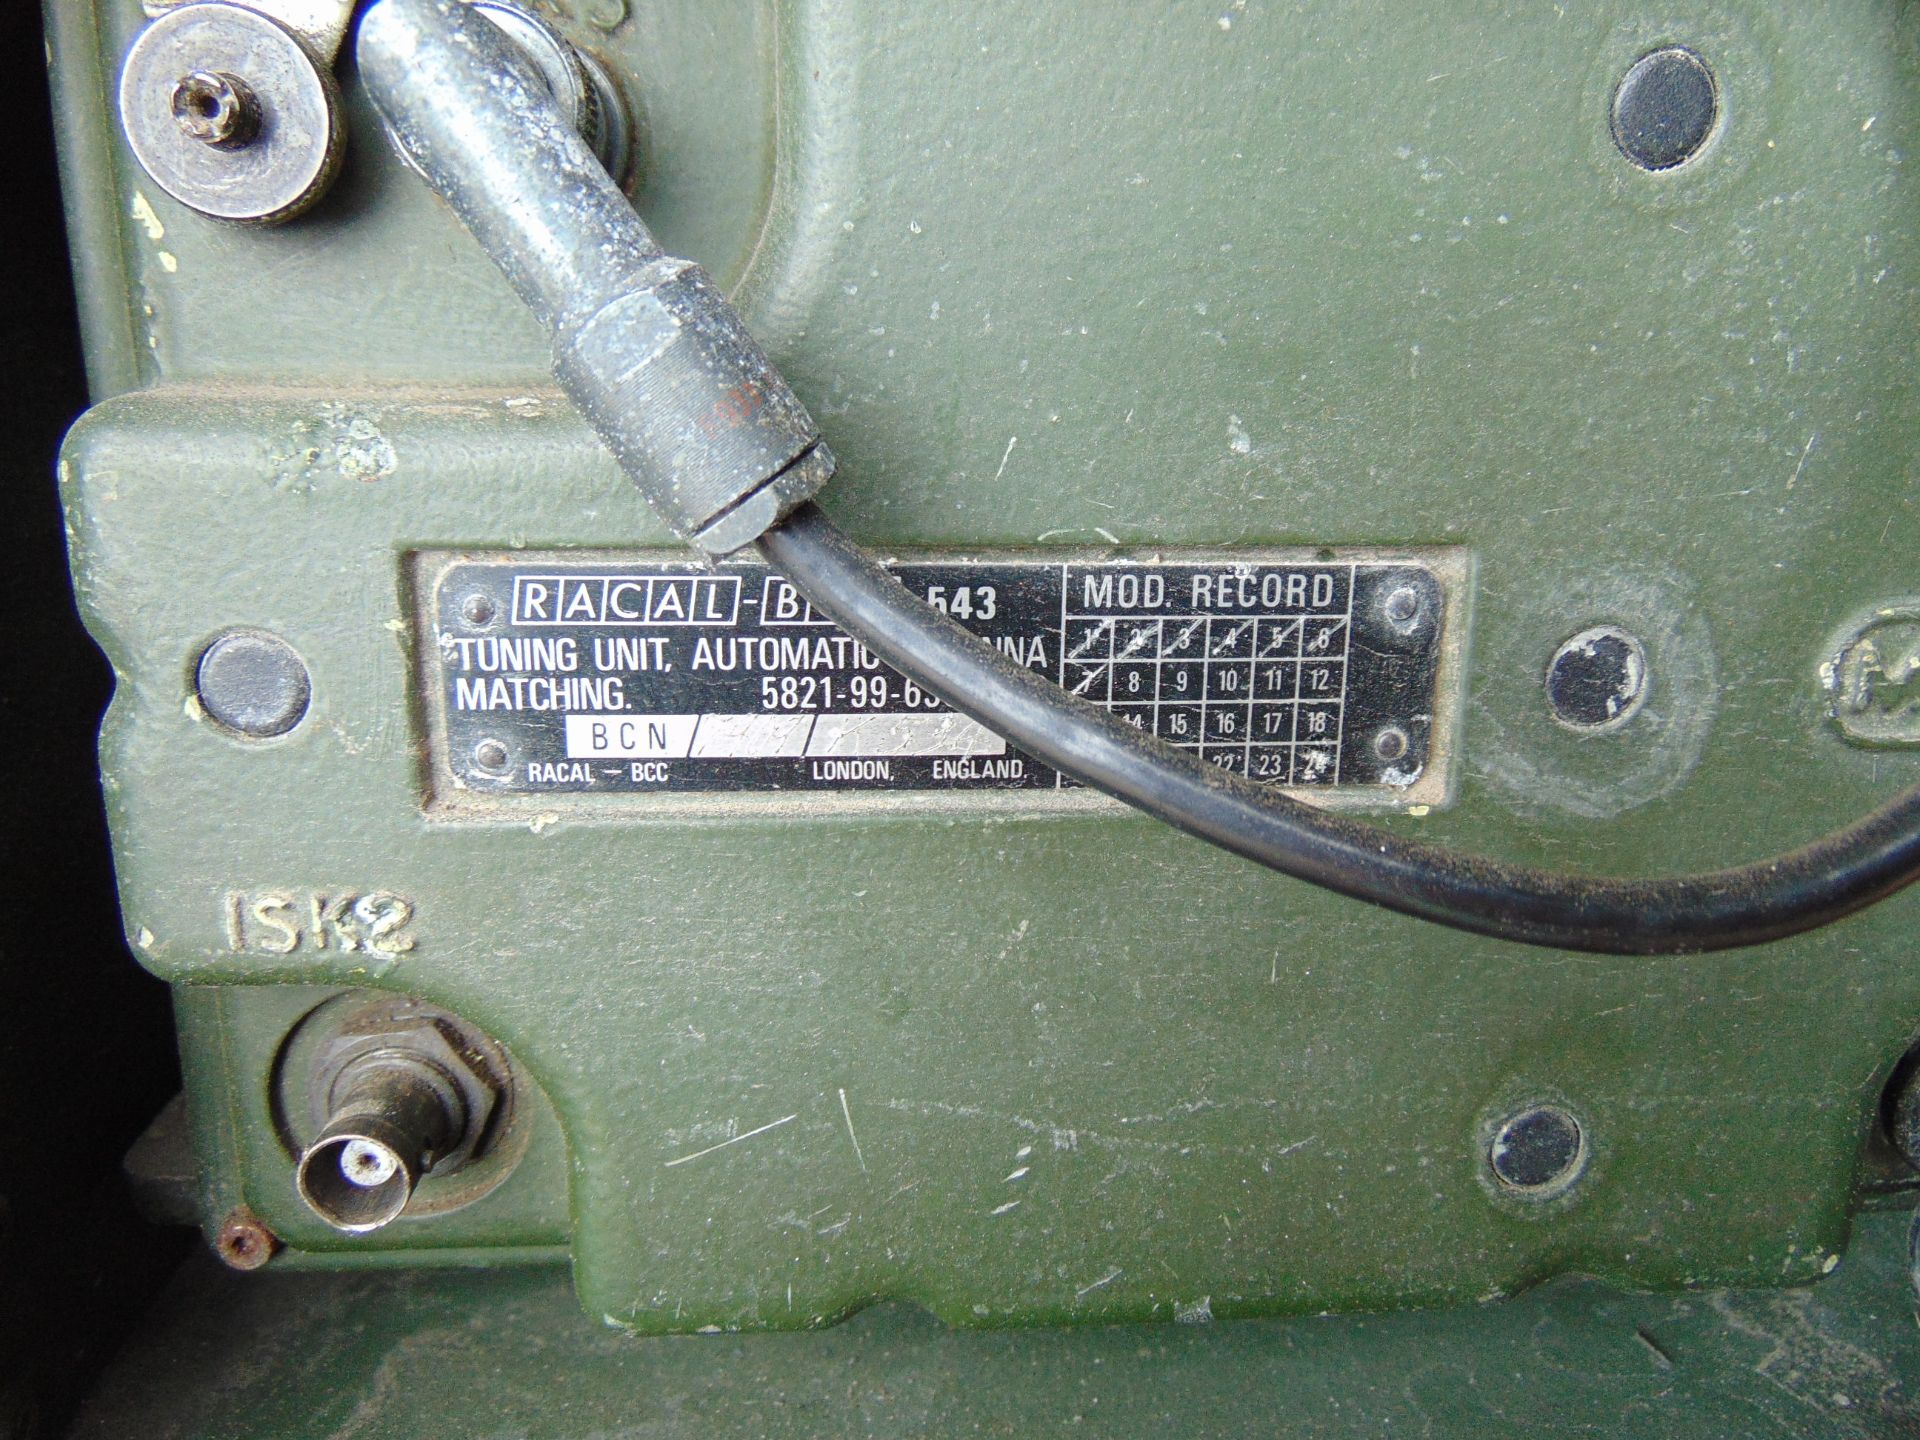 Clansman Land Rover Wing Box c/w Tuner and Antenna Base Getting Hard to Find - Image 4 of 7